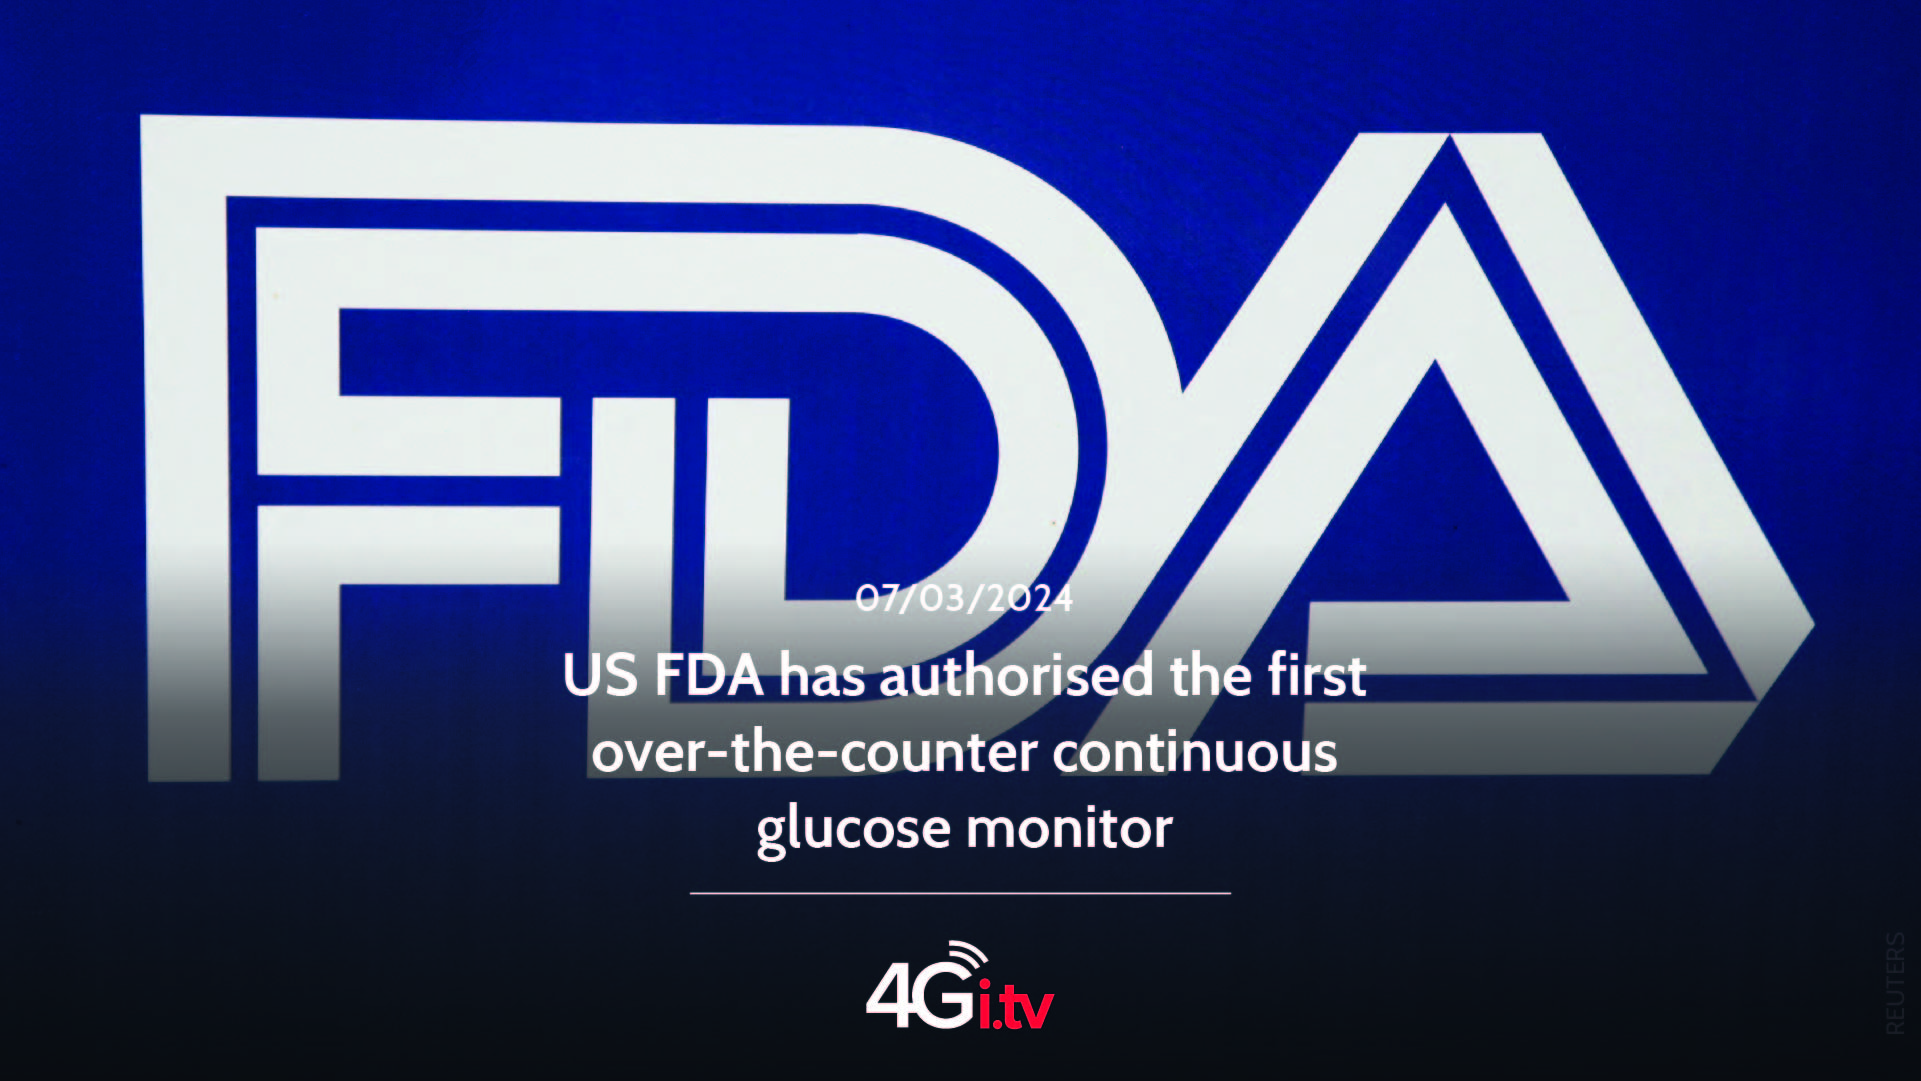 Read more about the article US FDA has authorised the first over-the-counter continuous glucose monitor